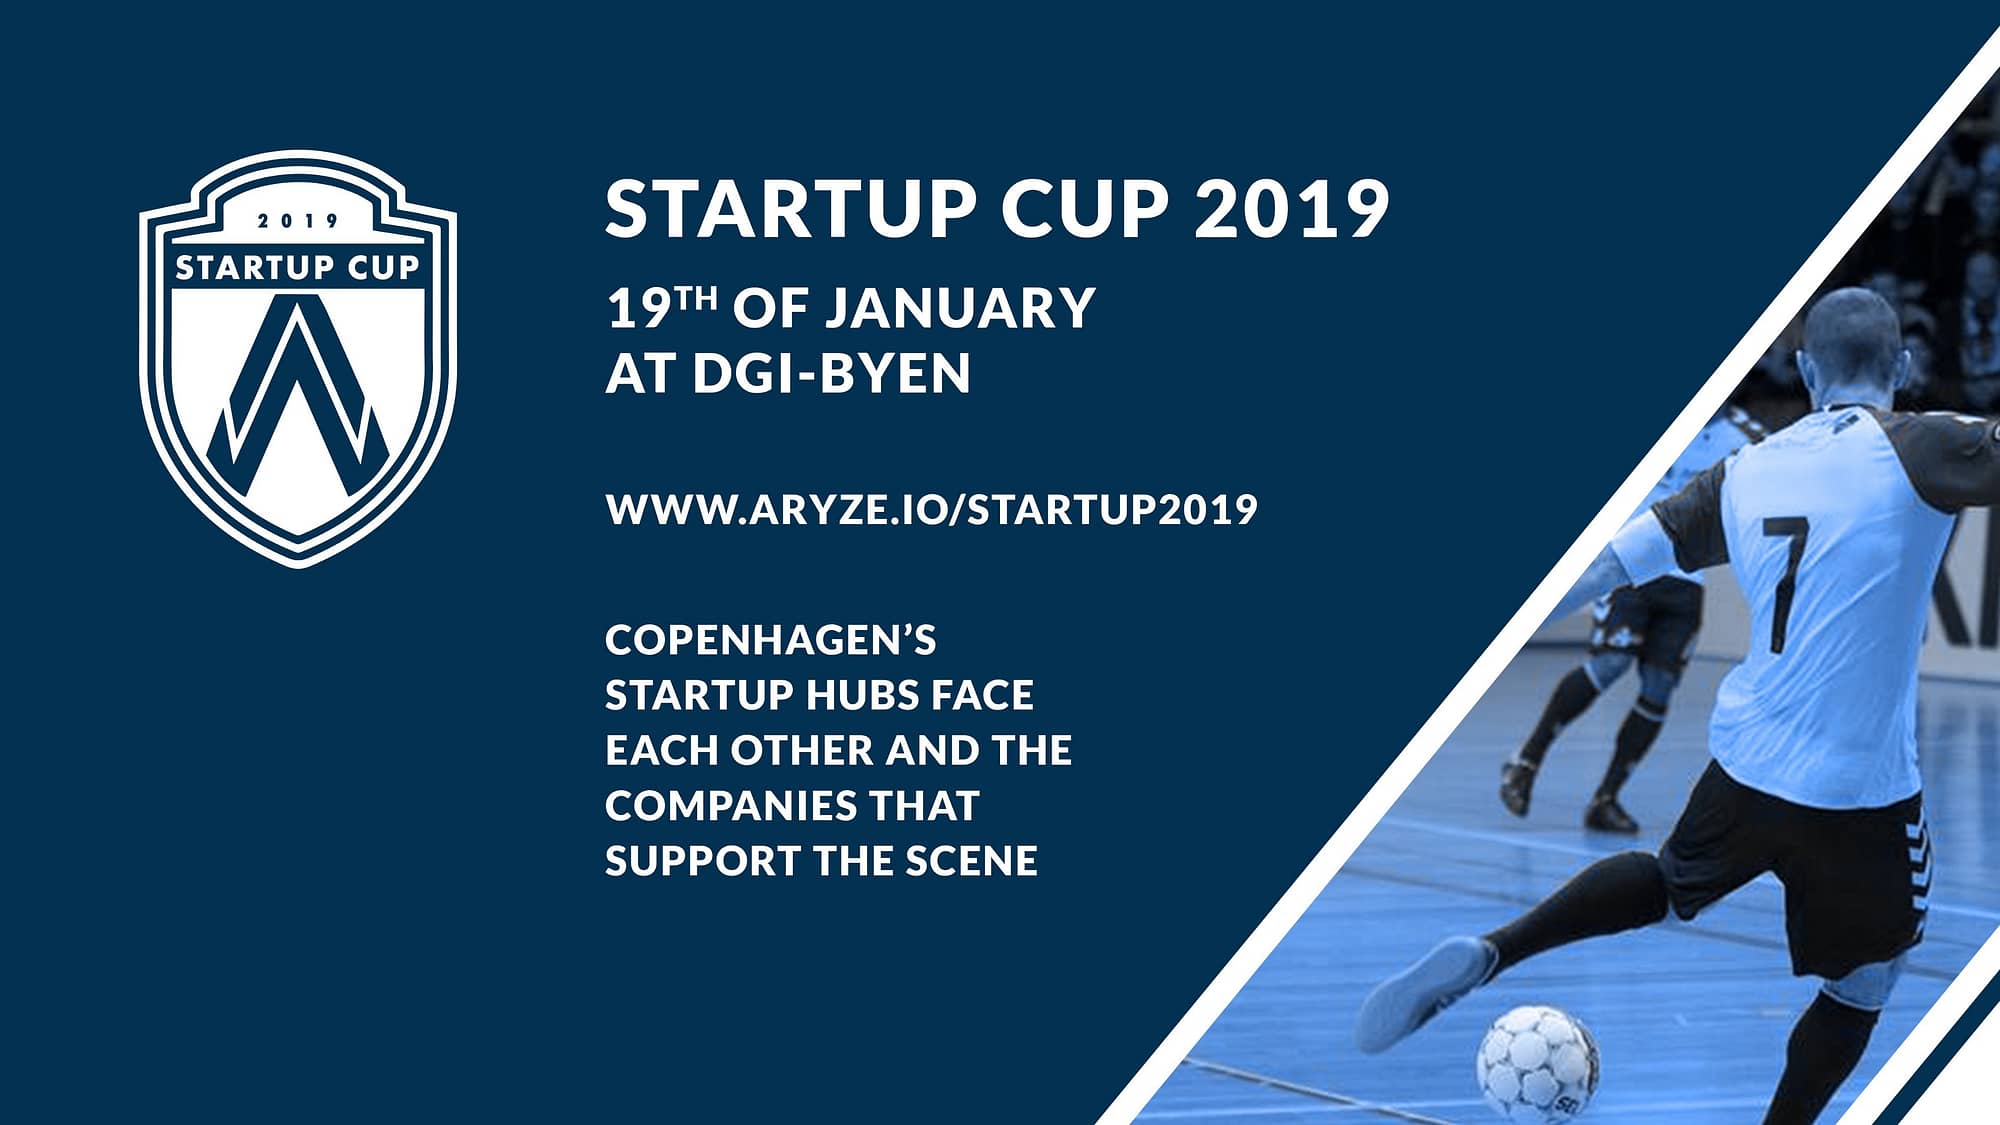 Startup Cup 2019